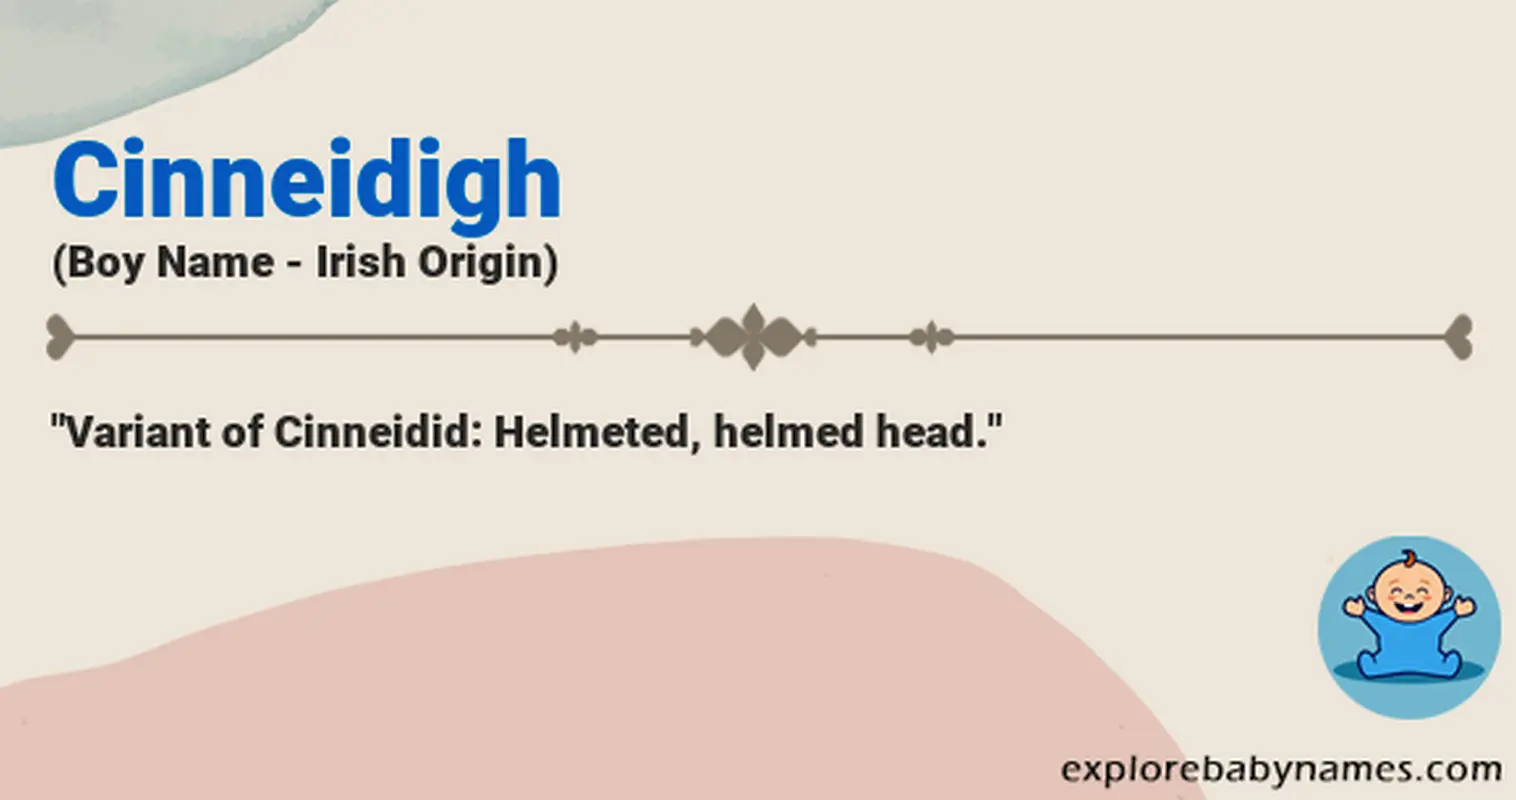 Meaning of Cinneidigh